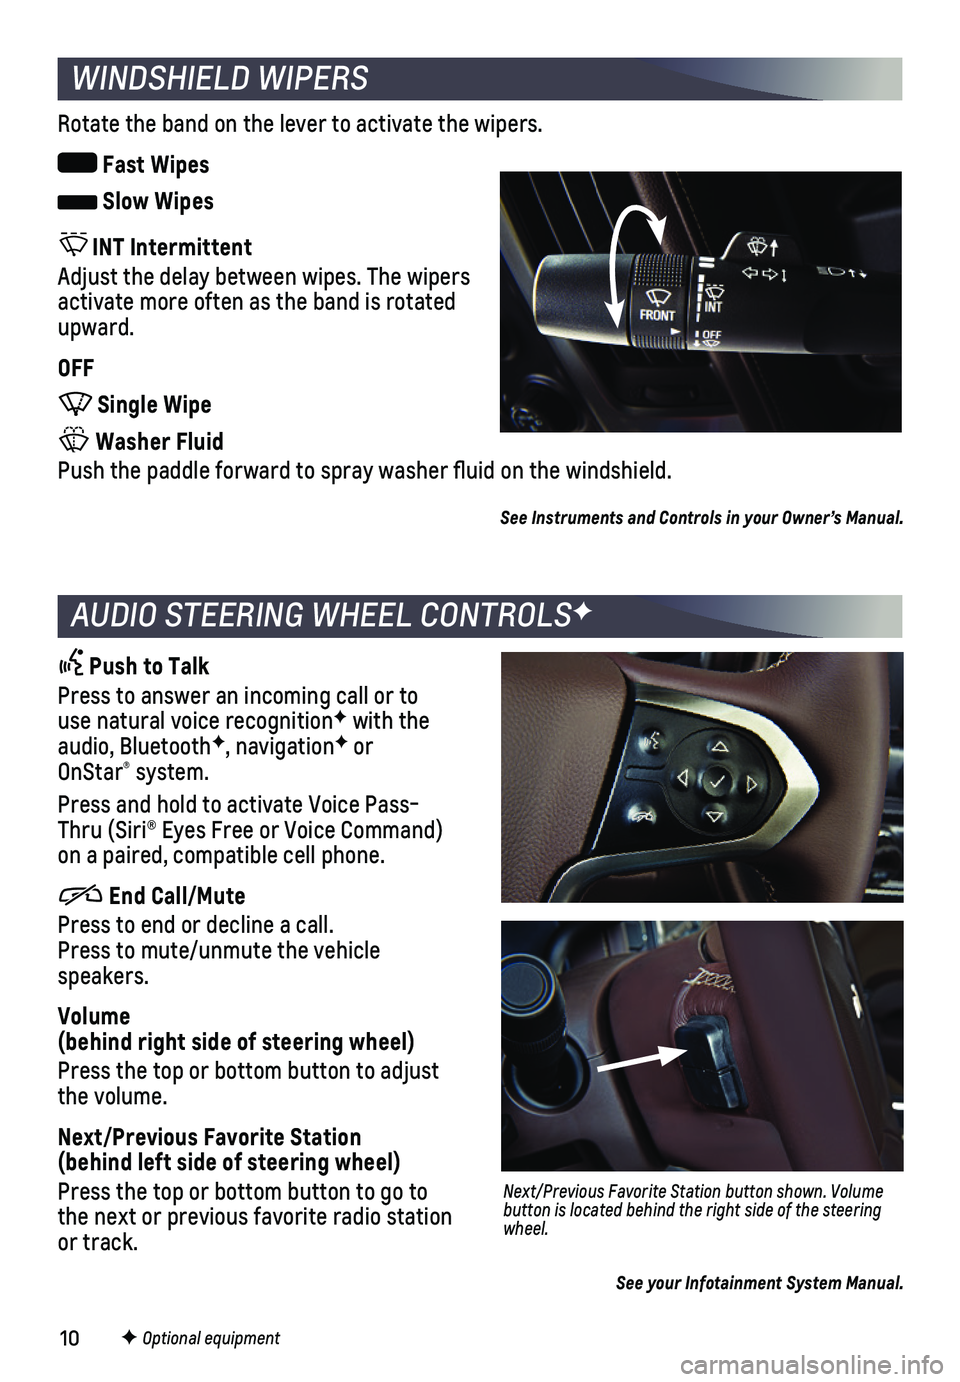 CHEVROLET SILVERADO 2018  Get To Know Guide 10
WINDSHIELD WIPERS
Rotate the band on the lever to activate the wipers.
 Fast Wipes
 Slow Wipes 
 INT Intermittent
Adjust the delay between wipes. The  wipers activate more often as the band is ro